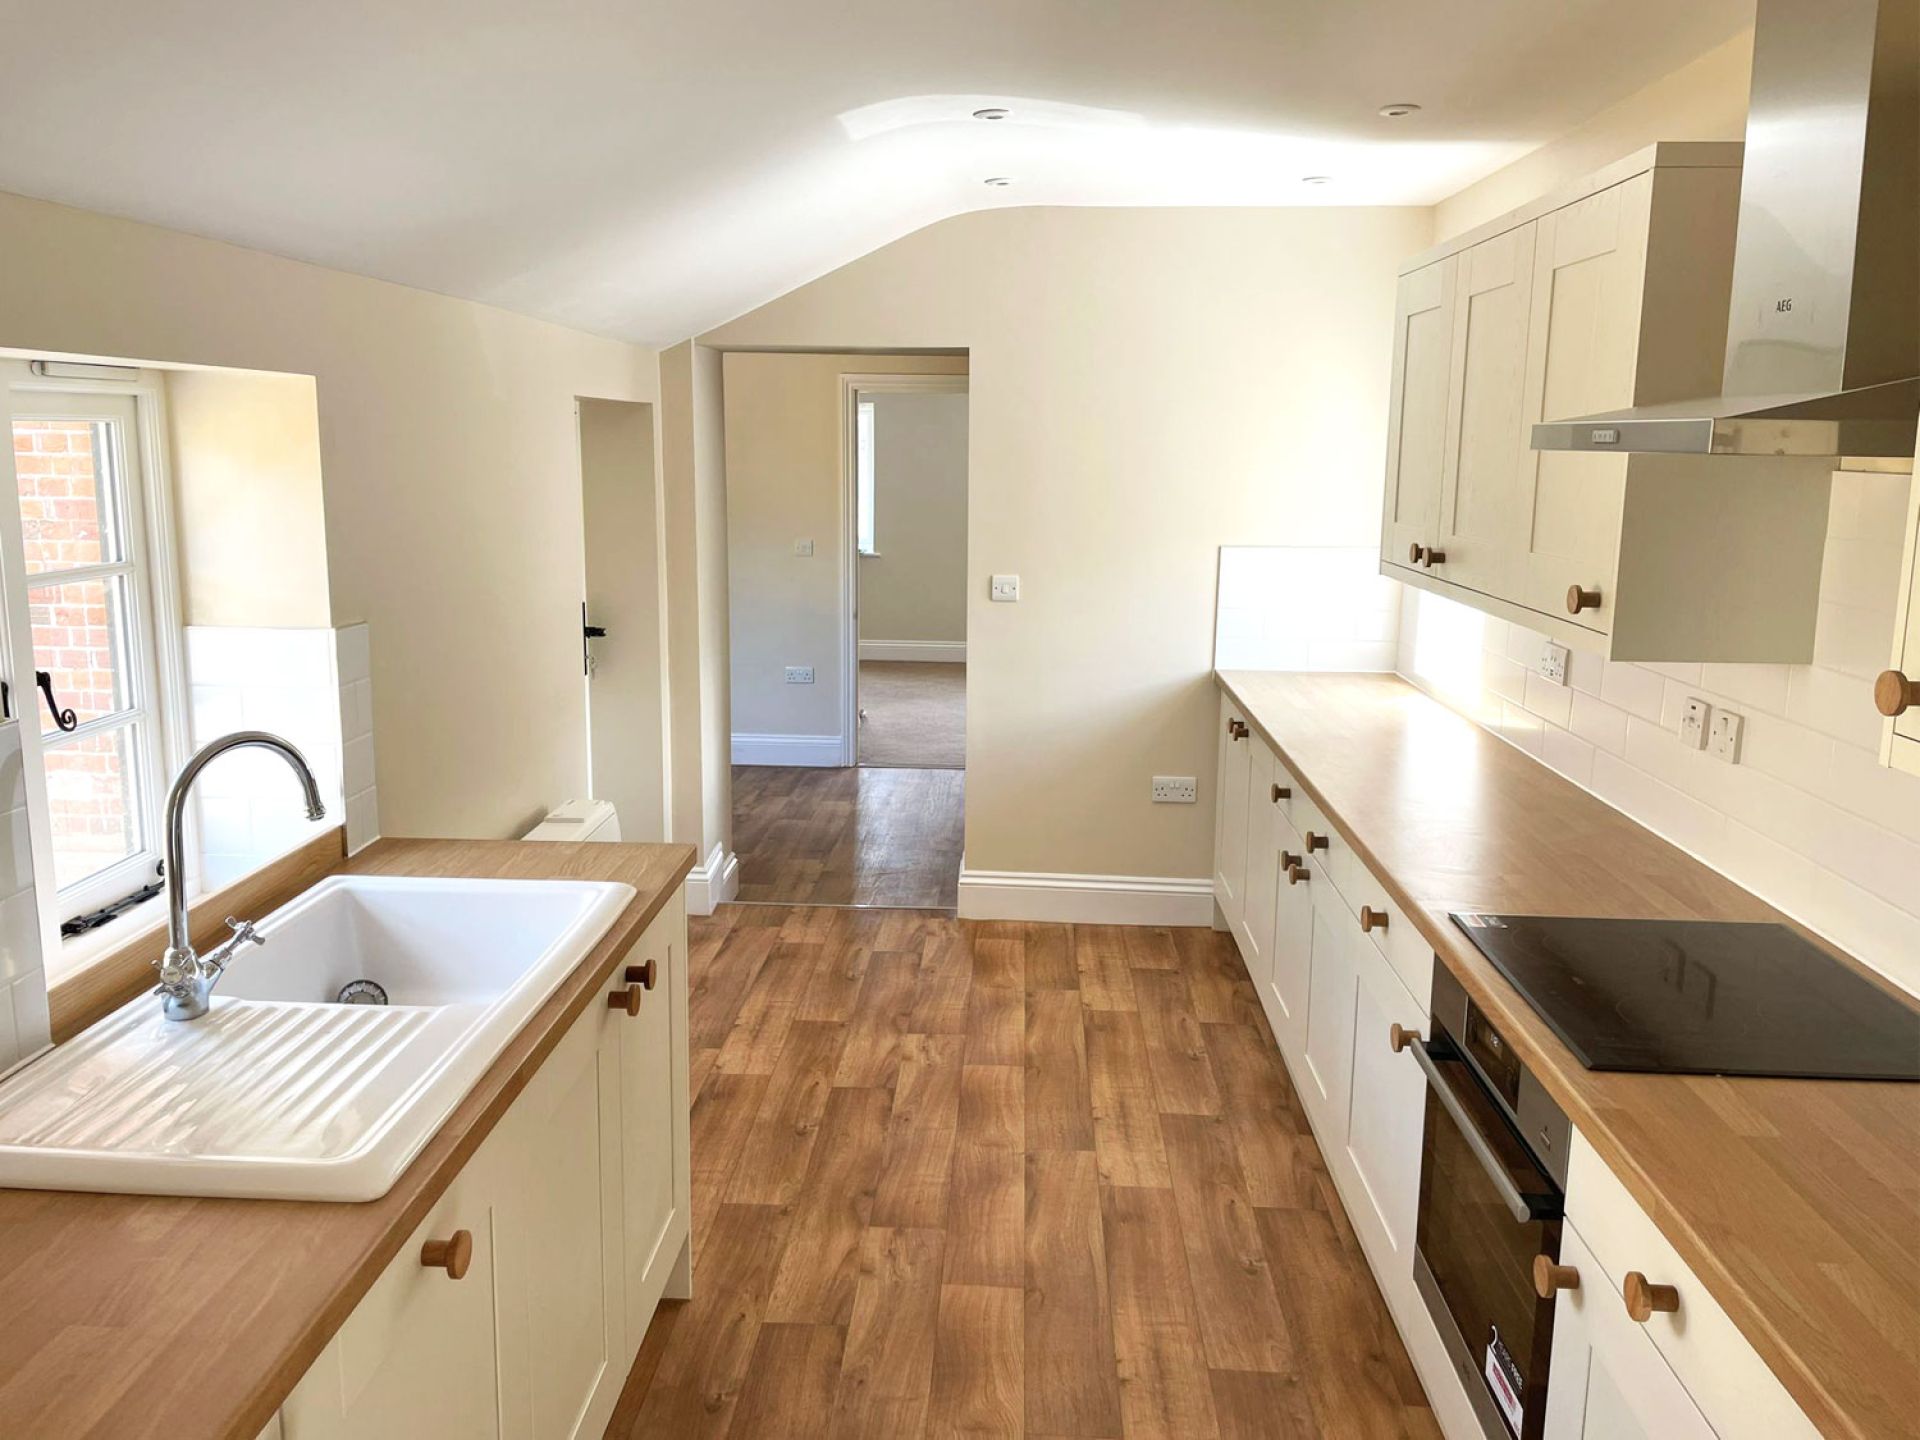 Brand new kitchen fitted in cranborne house refurbishment with magnolia walls, white ceiling and wooden floor details.